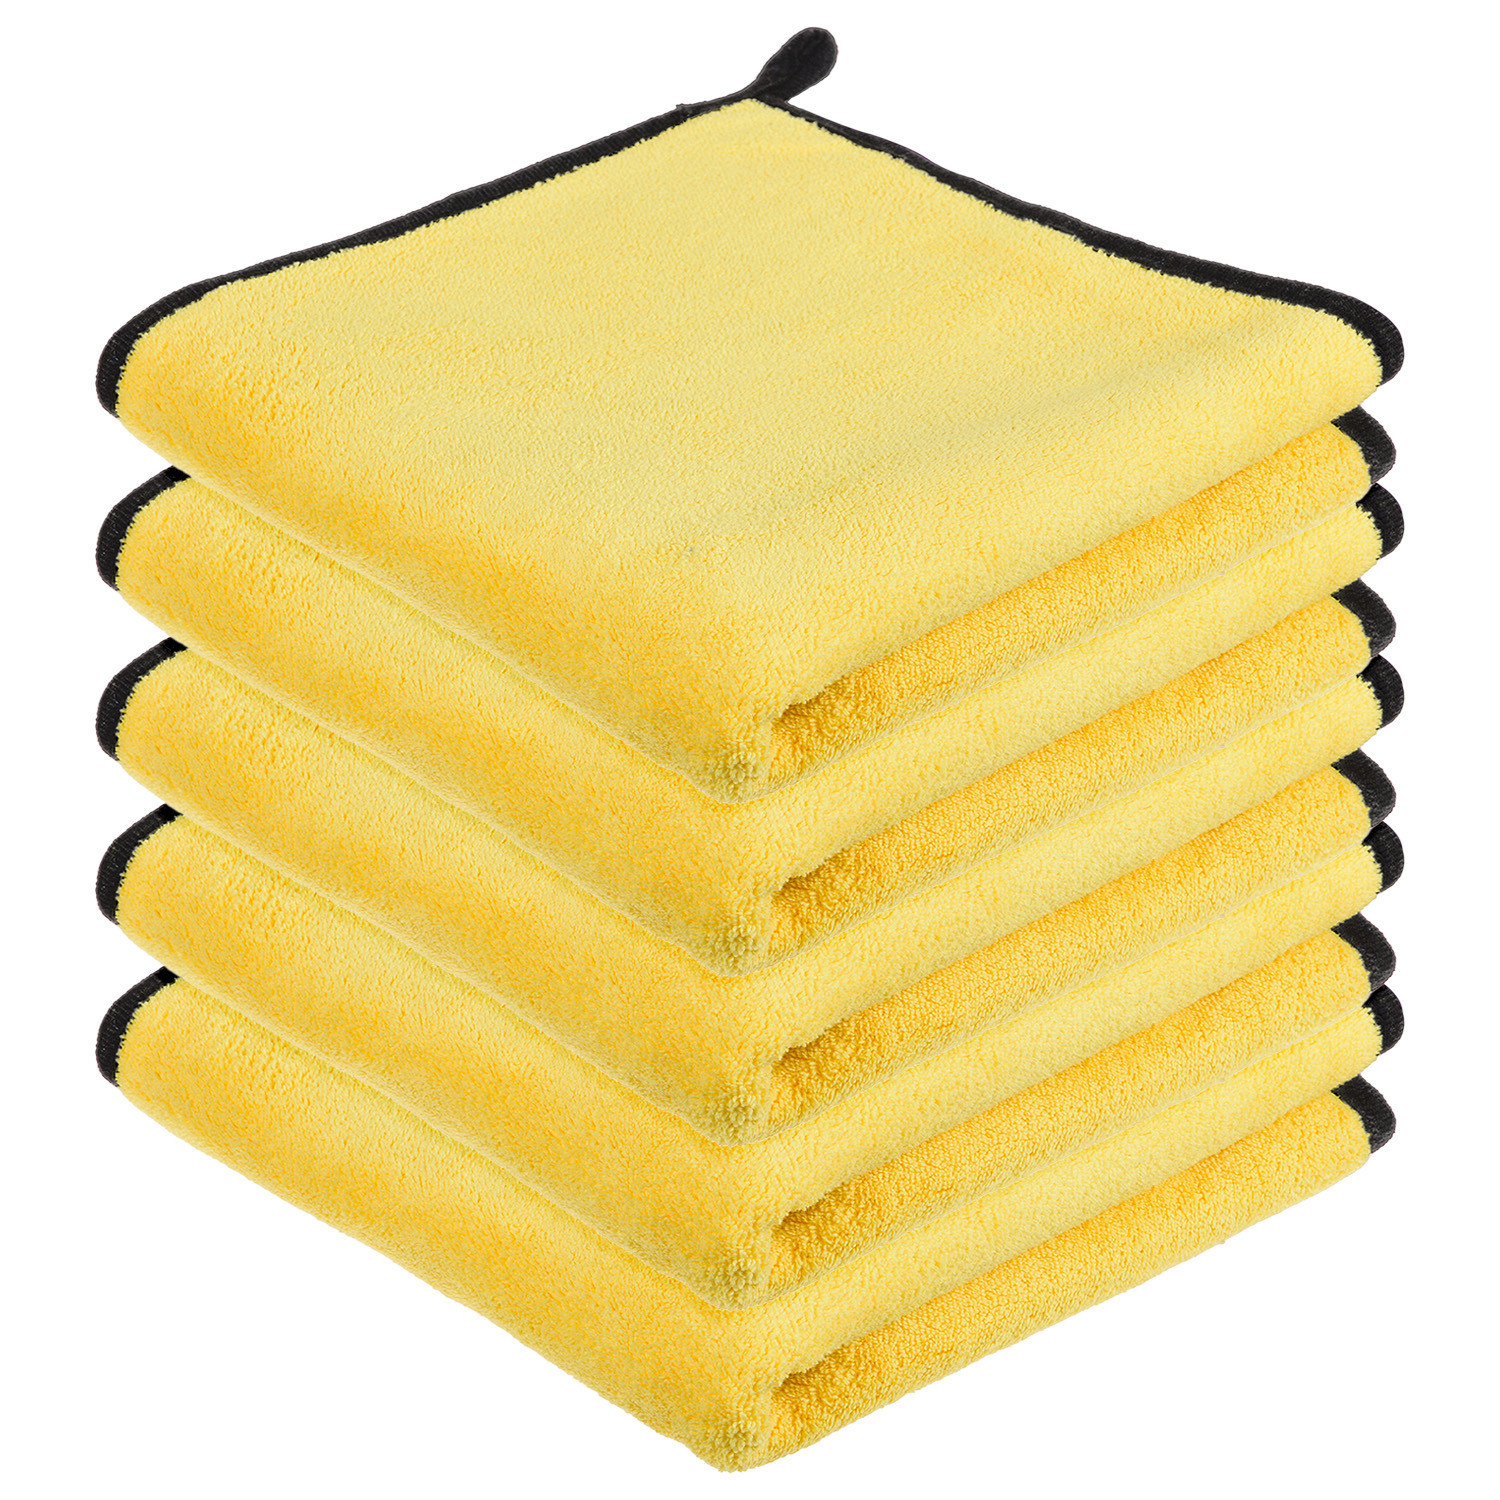 Kuber Industries Cleaning Towel | Reusable Cleaning Cloths for Kitchen | Duster Towel for Home Cleaning | 400 GSM Cleaning Cloth Towel with Hanging Loop | 40x60 | Yellow